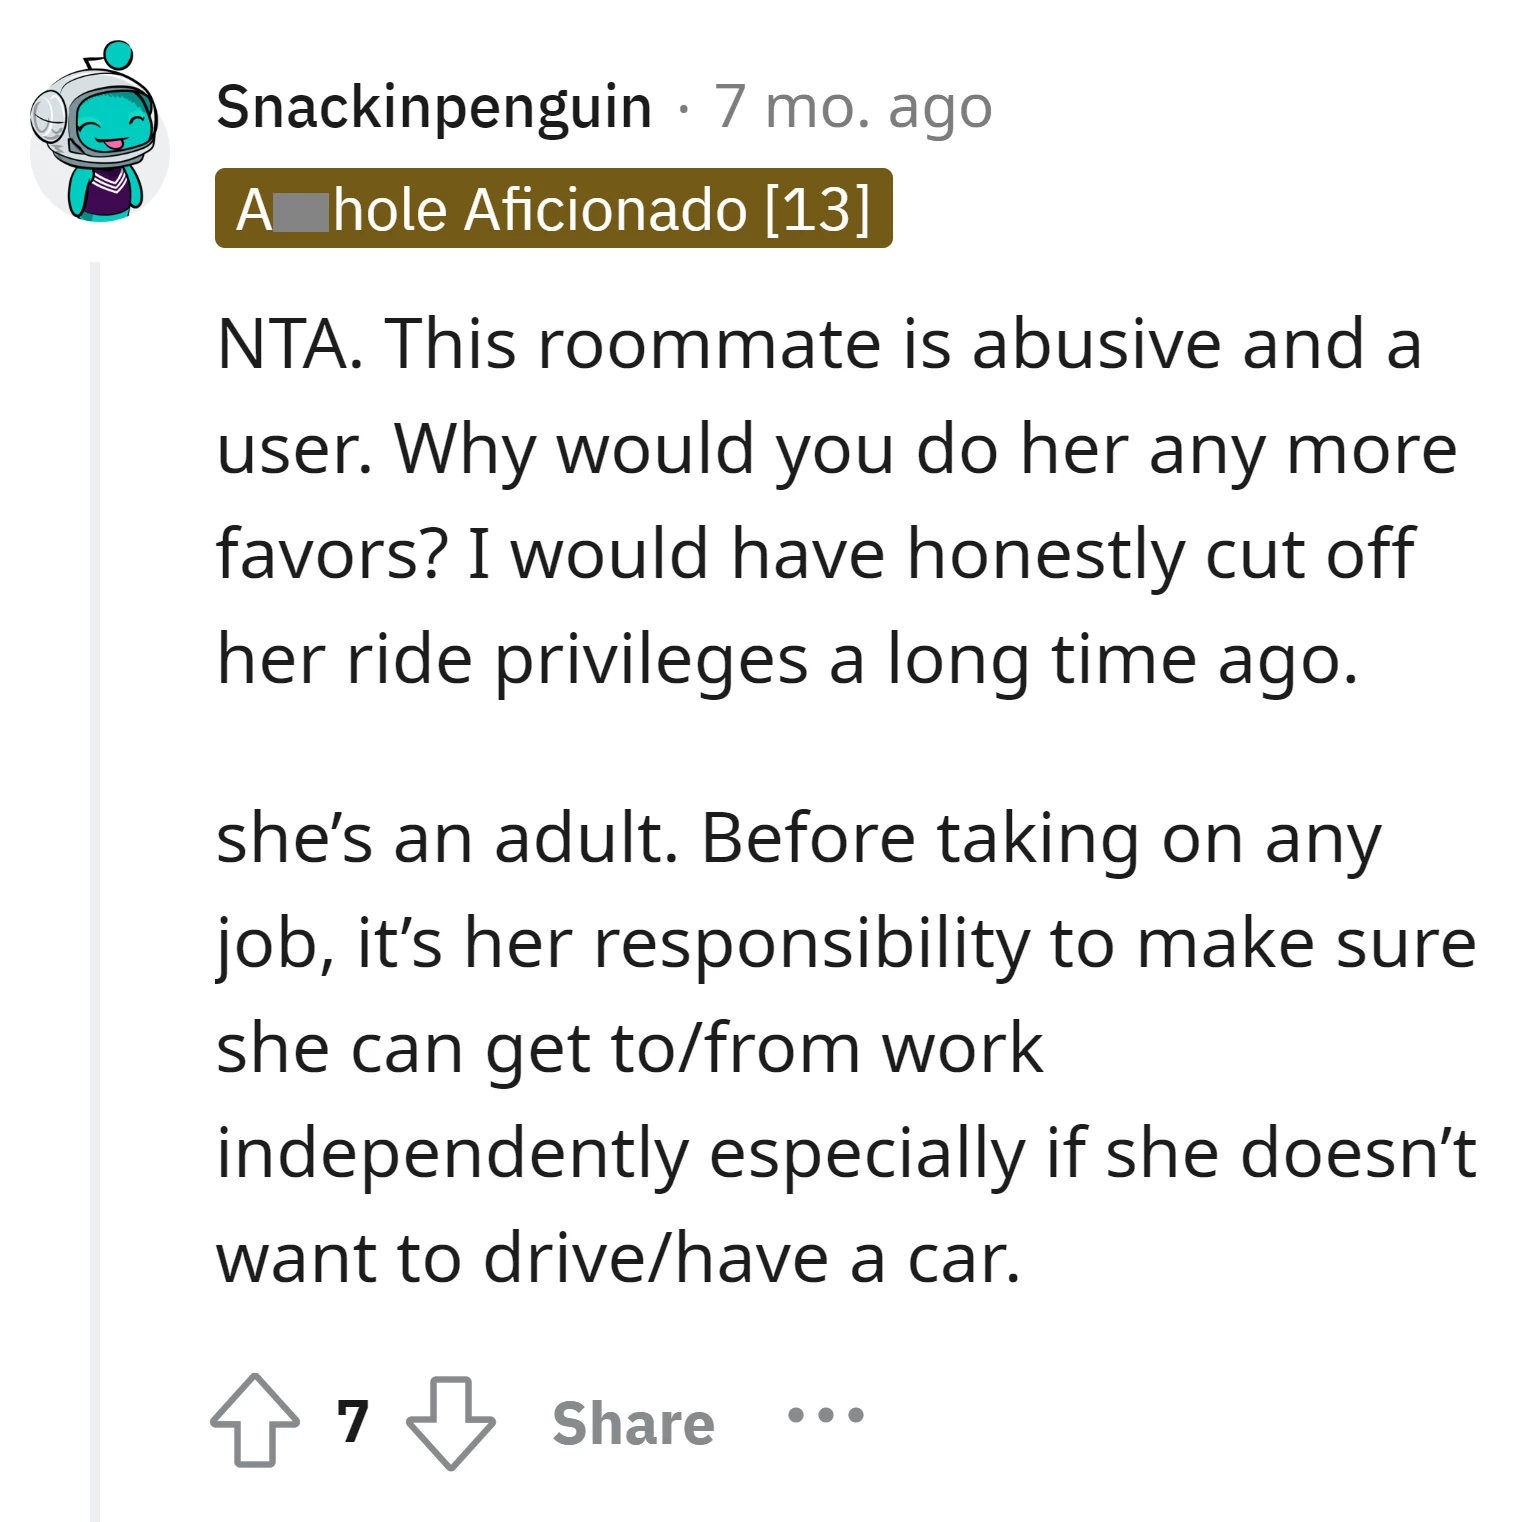 The OP doesn't have to do her roommate any more favors